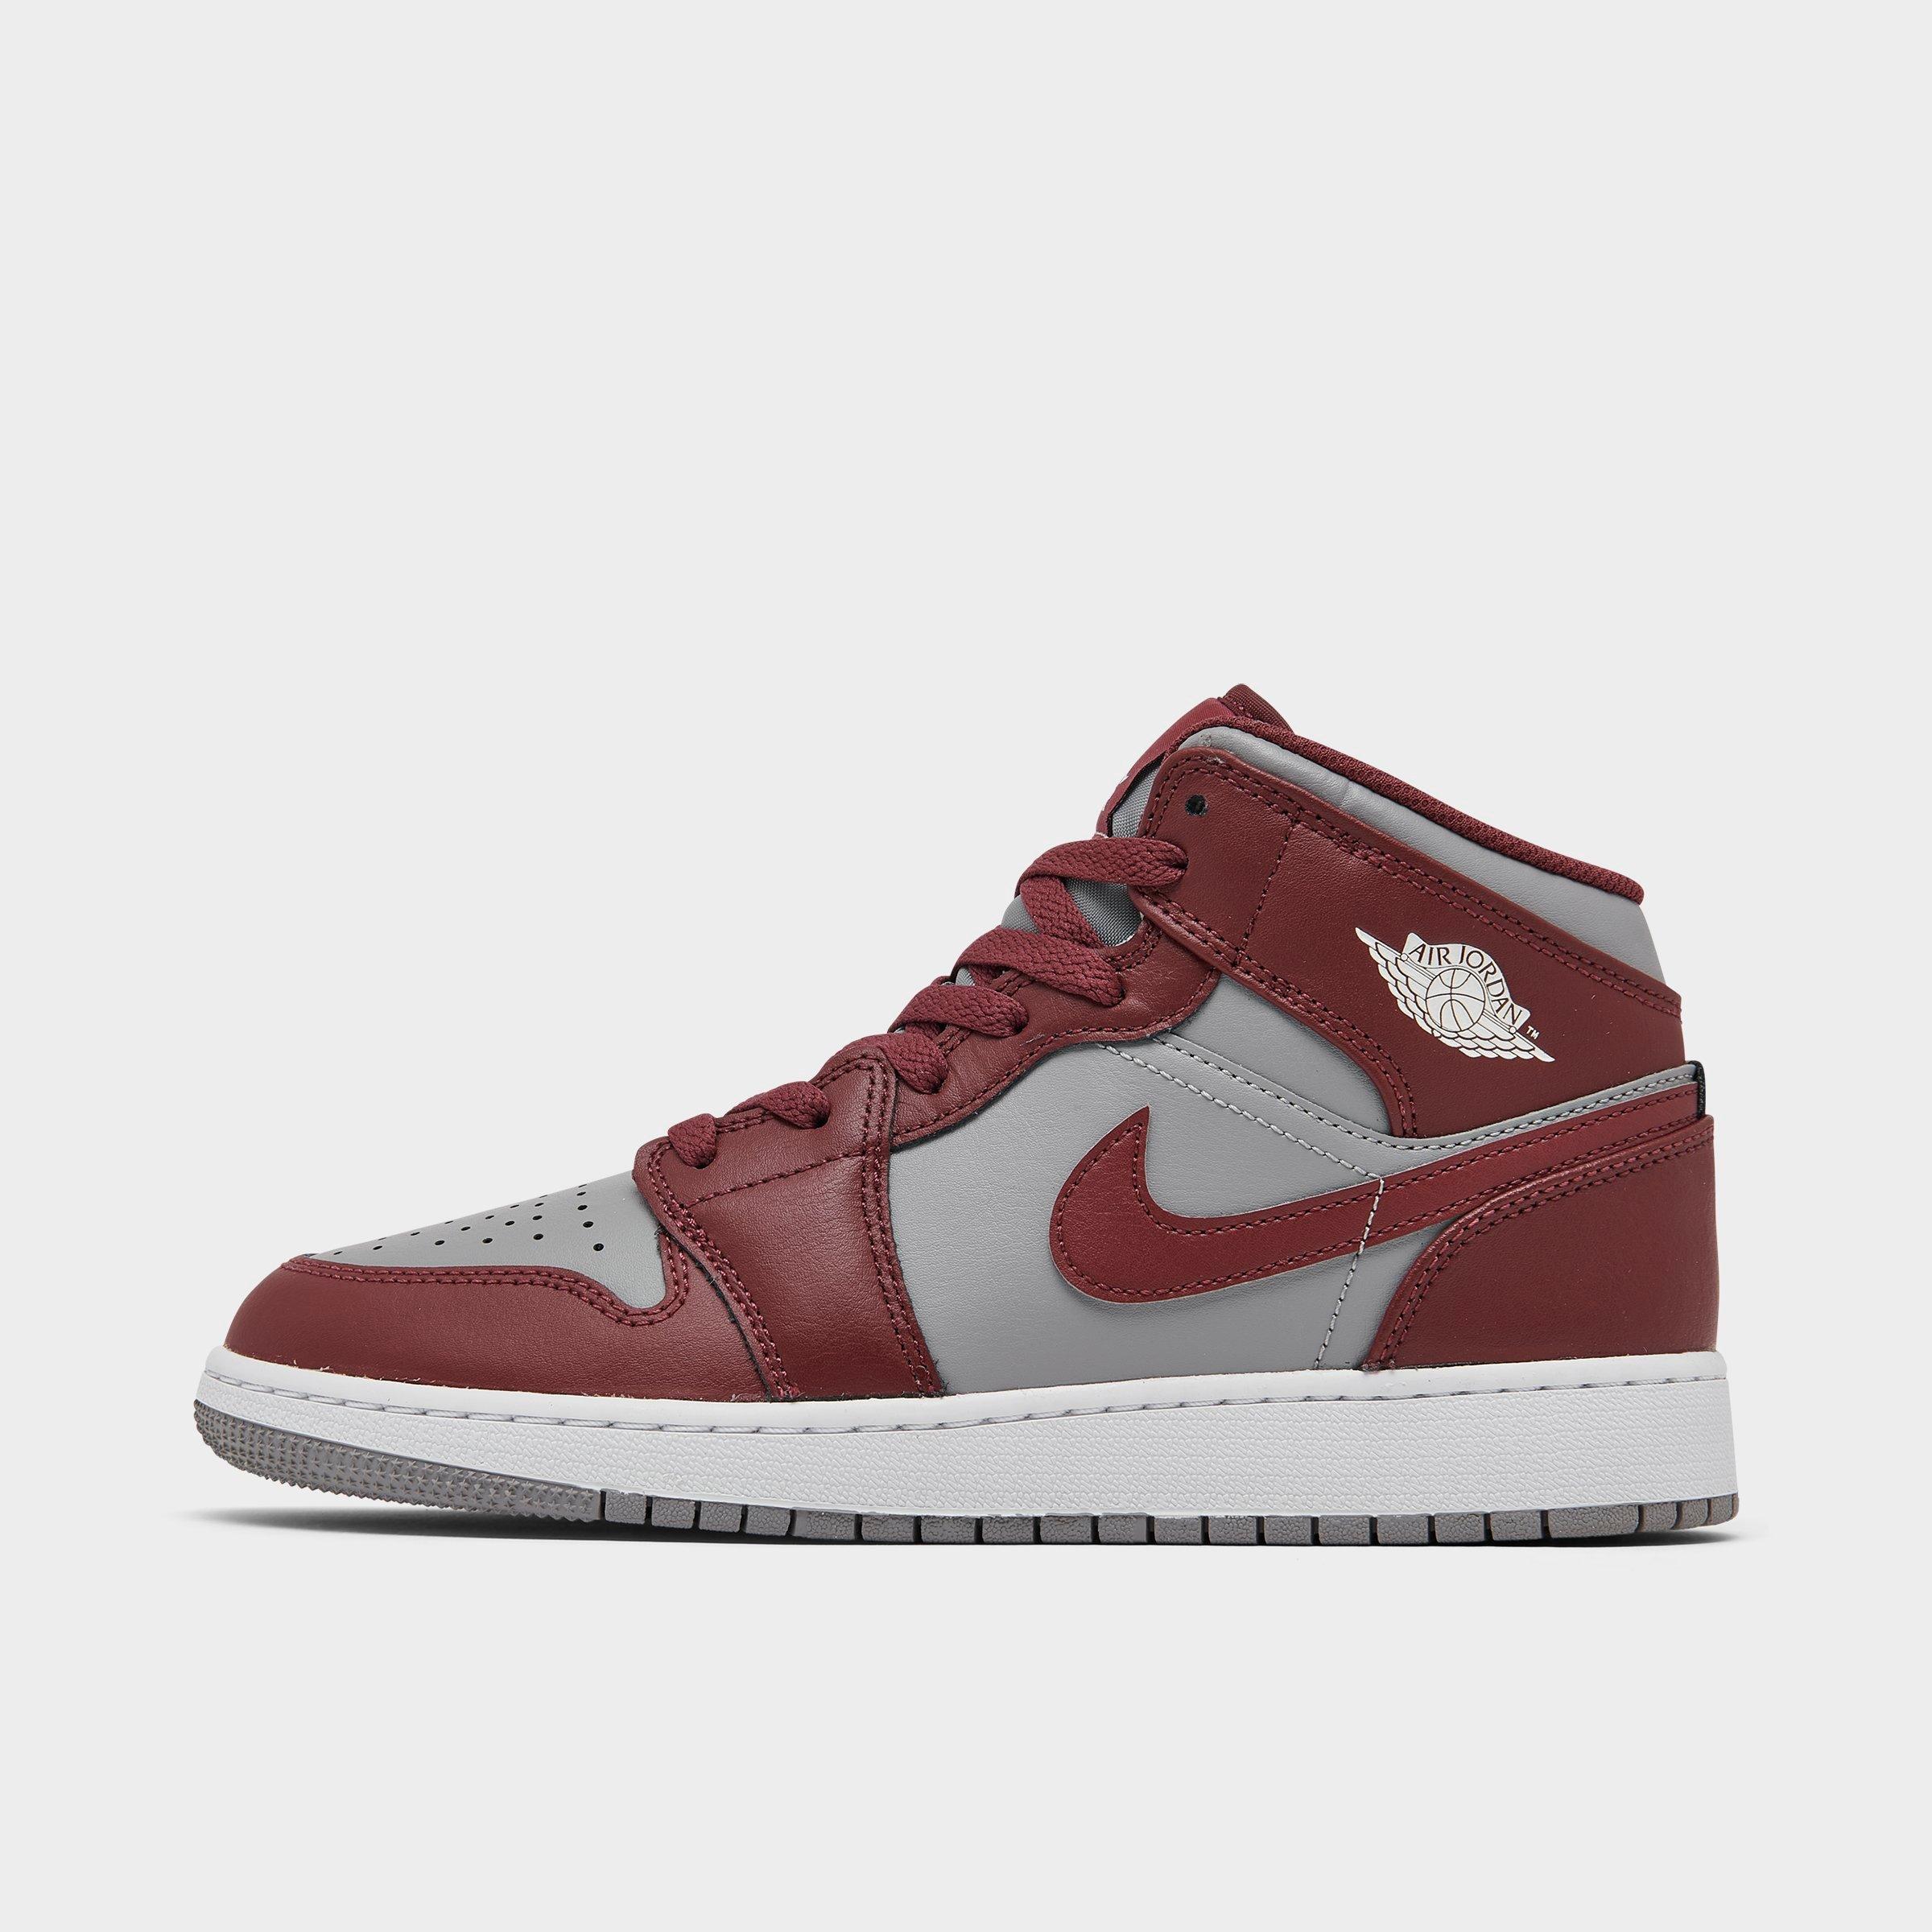 Nike Big Kids' Air Jordan Retro 1 Mid Casual Shoes In Cherrywood Red/cement Grey/white